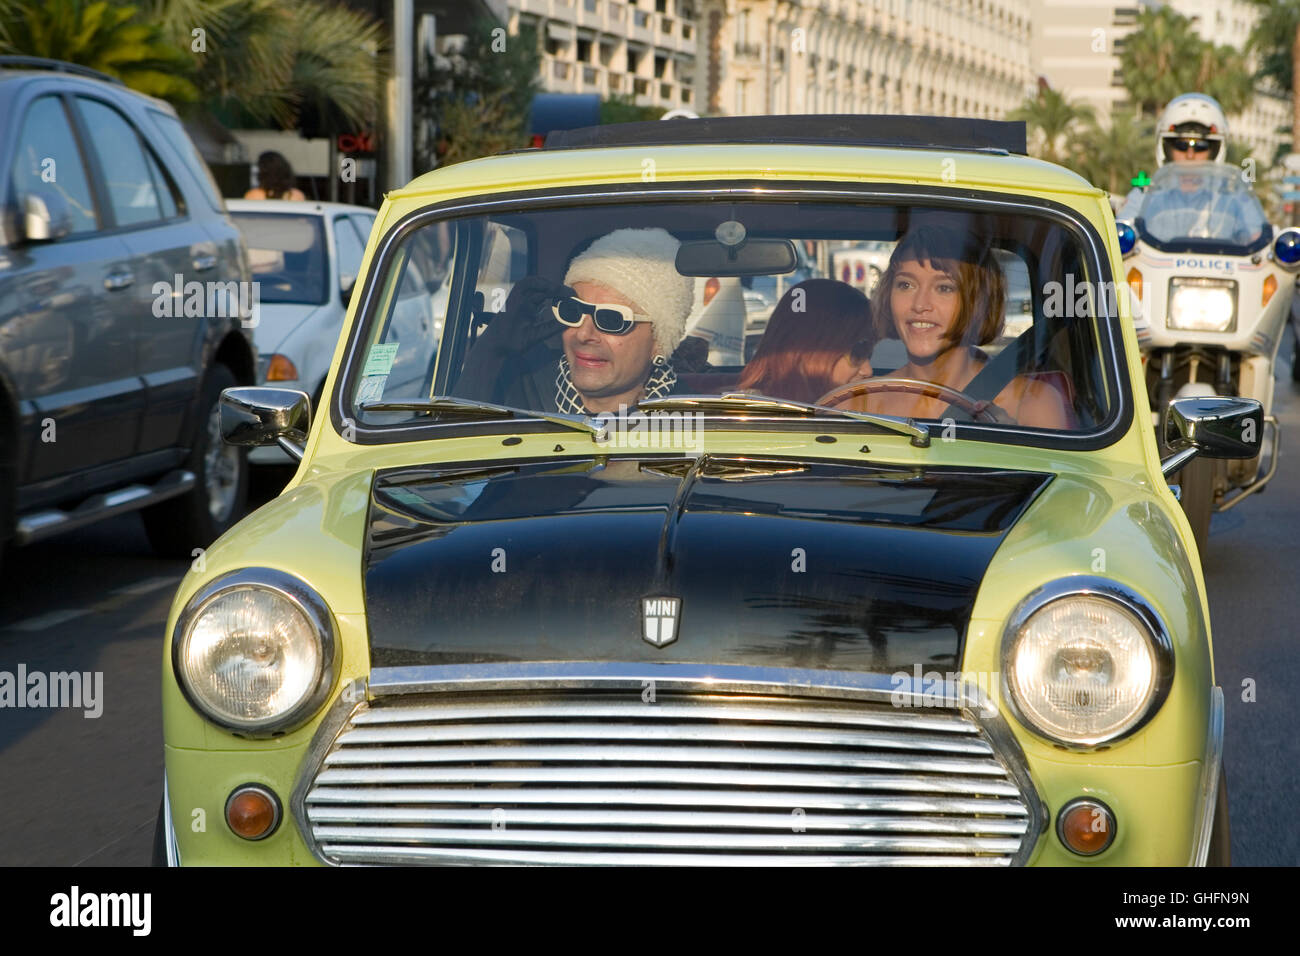 MR. BEAN MACHT FERIEN Mr. Bean's Holiday UK 2007 Steve Bendelack Mr. Bean macht Ferien / Mr. Bean (ROWAN ATKINSON) with sun glasses in the Mini Cooper. Regie: Steve Bendelack aka. Mr. Bean's Holiday Stock Photo